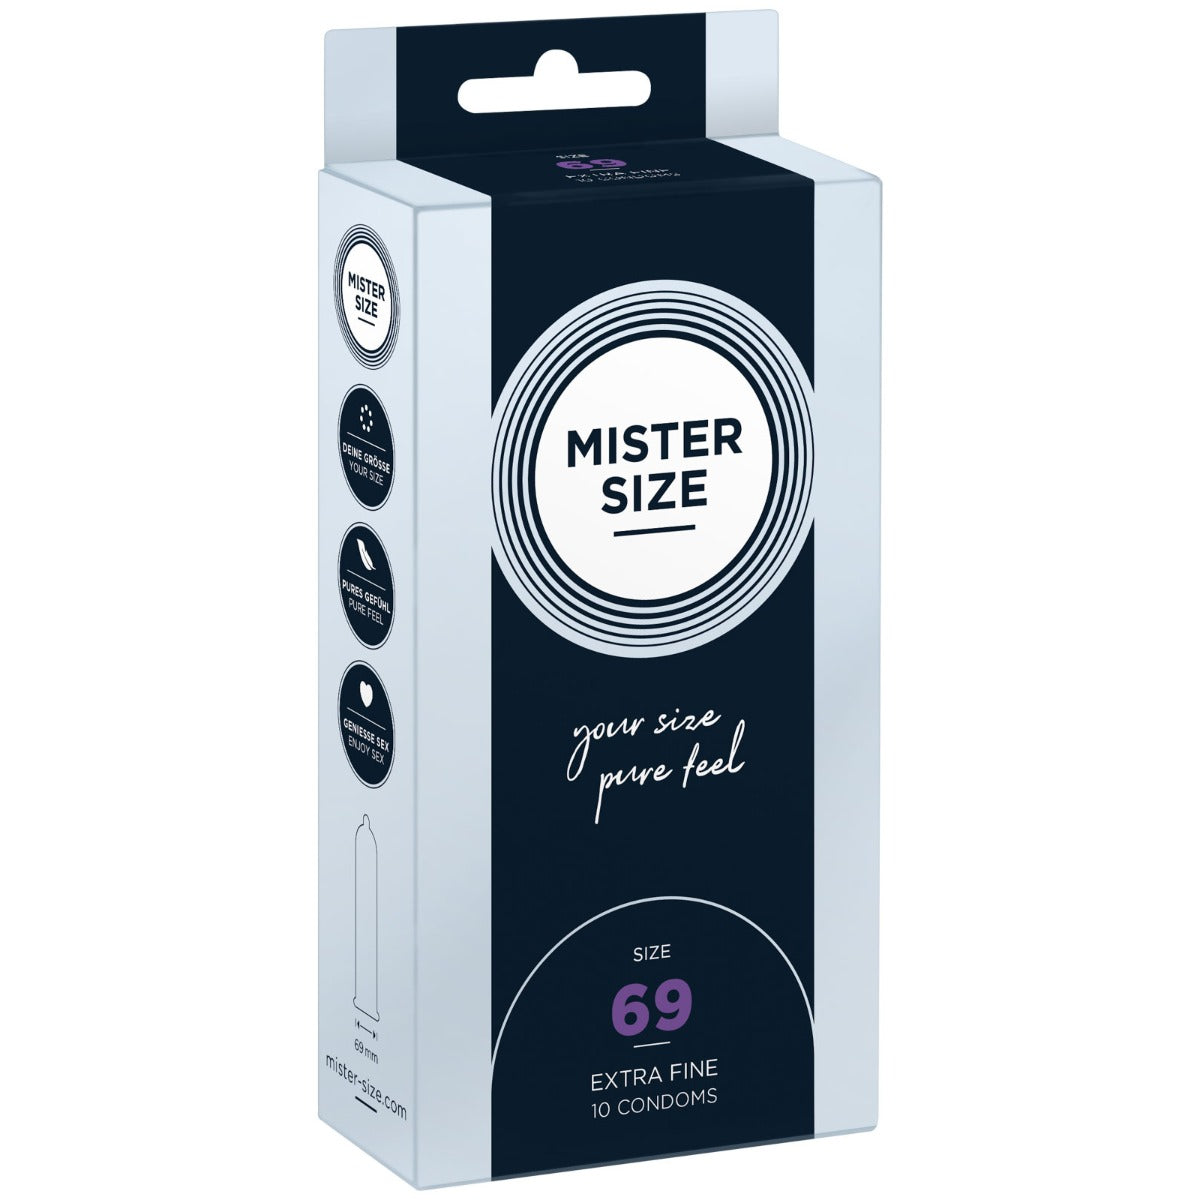 MISTER SIZE |  Pure feel Condoms - Size 69 mm (10 pack)